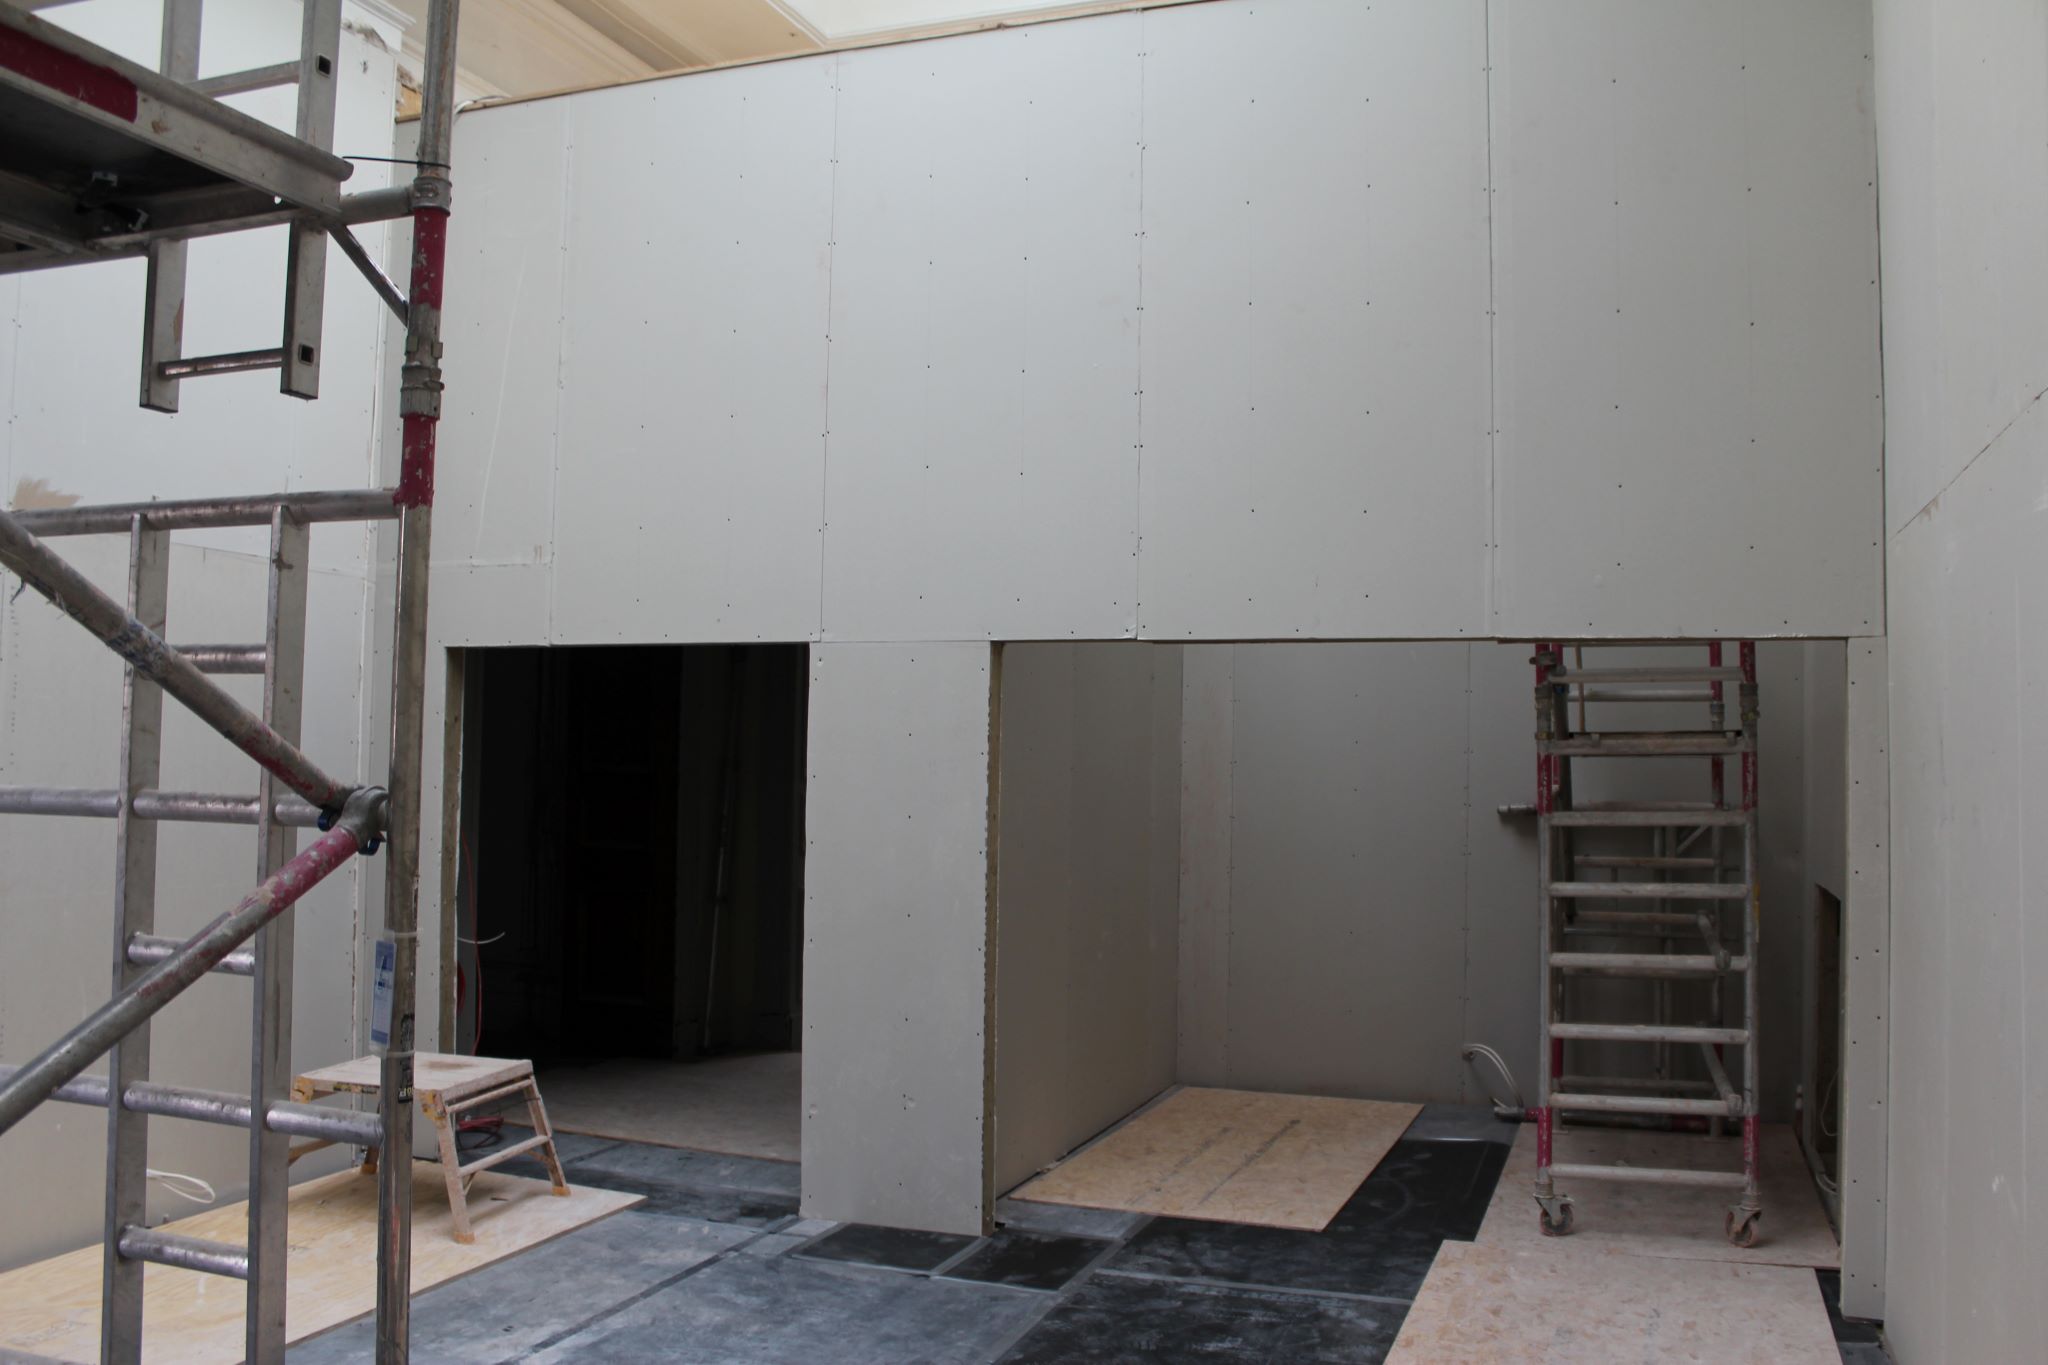 Internal space with scaffolding to the near left side and wall dividers at the back of the room 